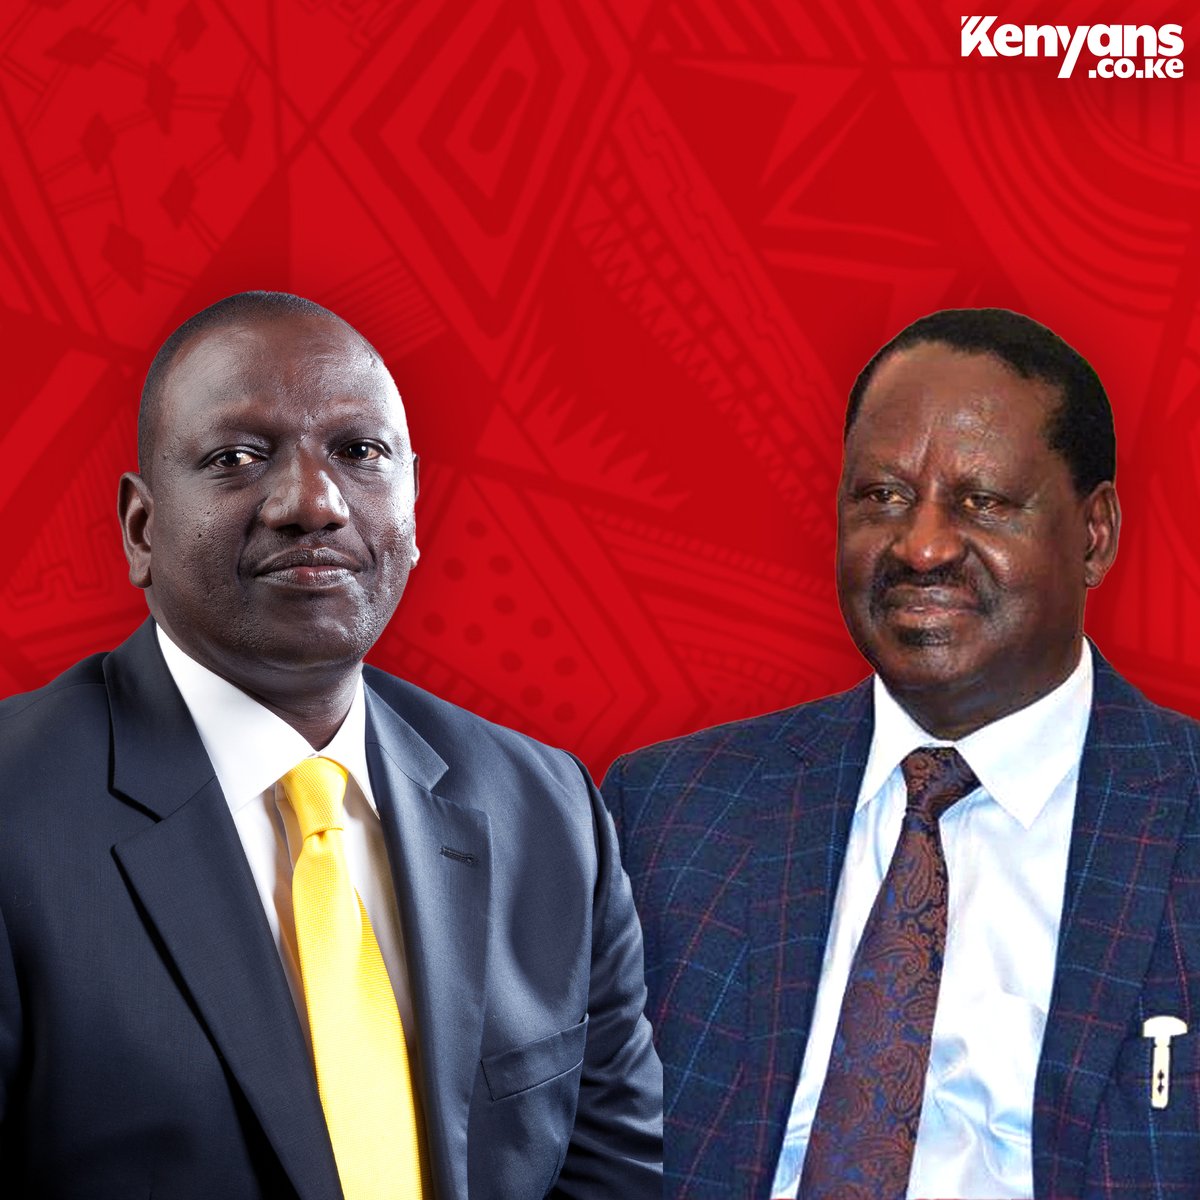 For instance if there will be a re-run, who will you vote as your president. likes for Ruto vs retweets for Raila. fred ngatia, supreme court, hassan omar, chebukati